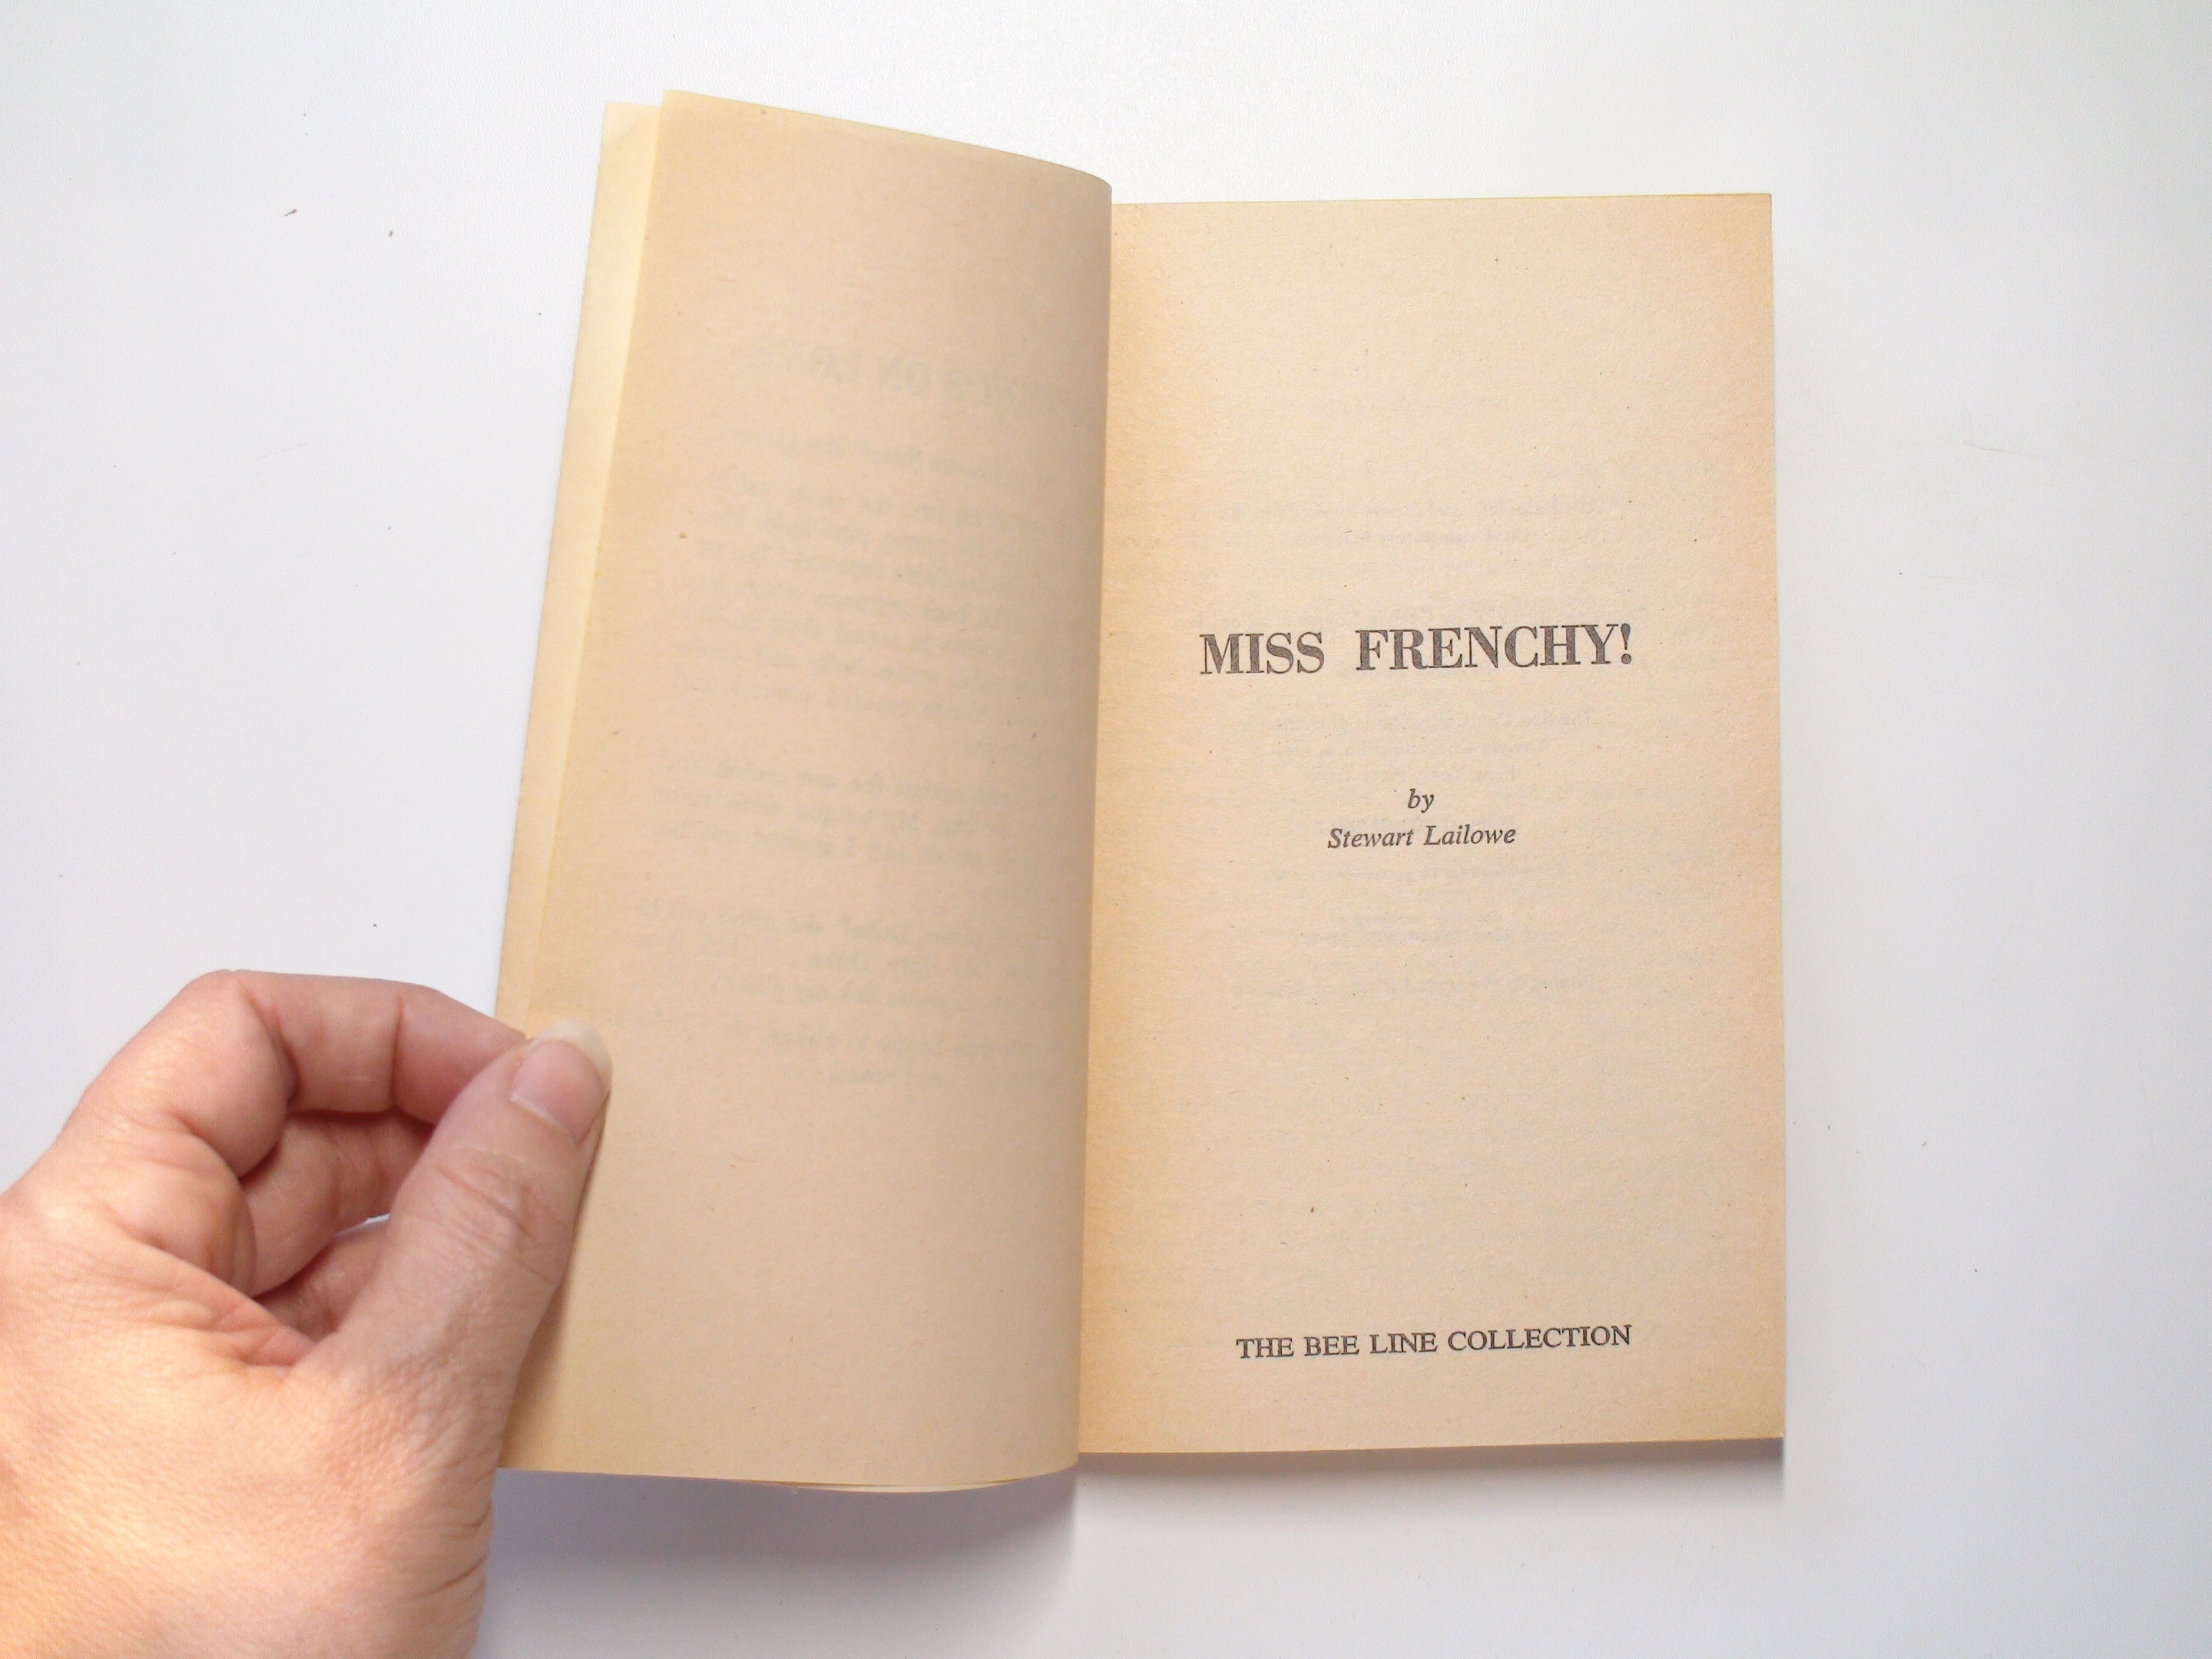 Miss Frenchy, by Stewart Lailowe, A Beeline Book, Erotica, Paperback, 1977